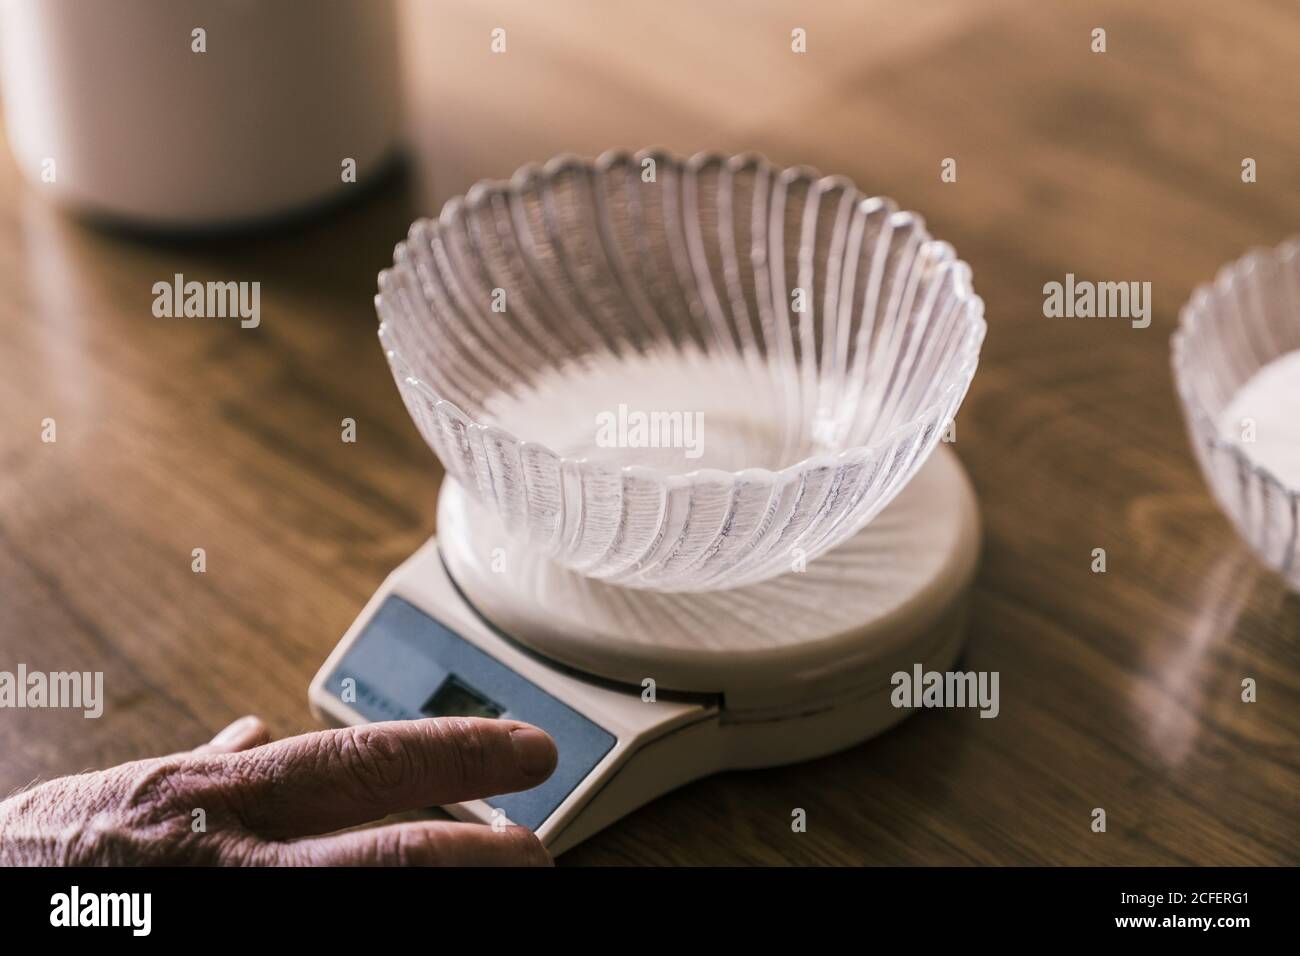 Cropped unrecognizable female hand weighting with electronic kitchen scale with glass bowl on top on wooden table Stock Photo